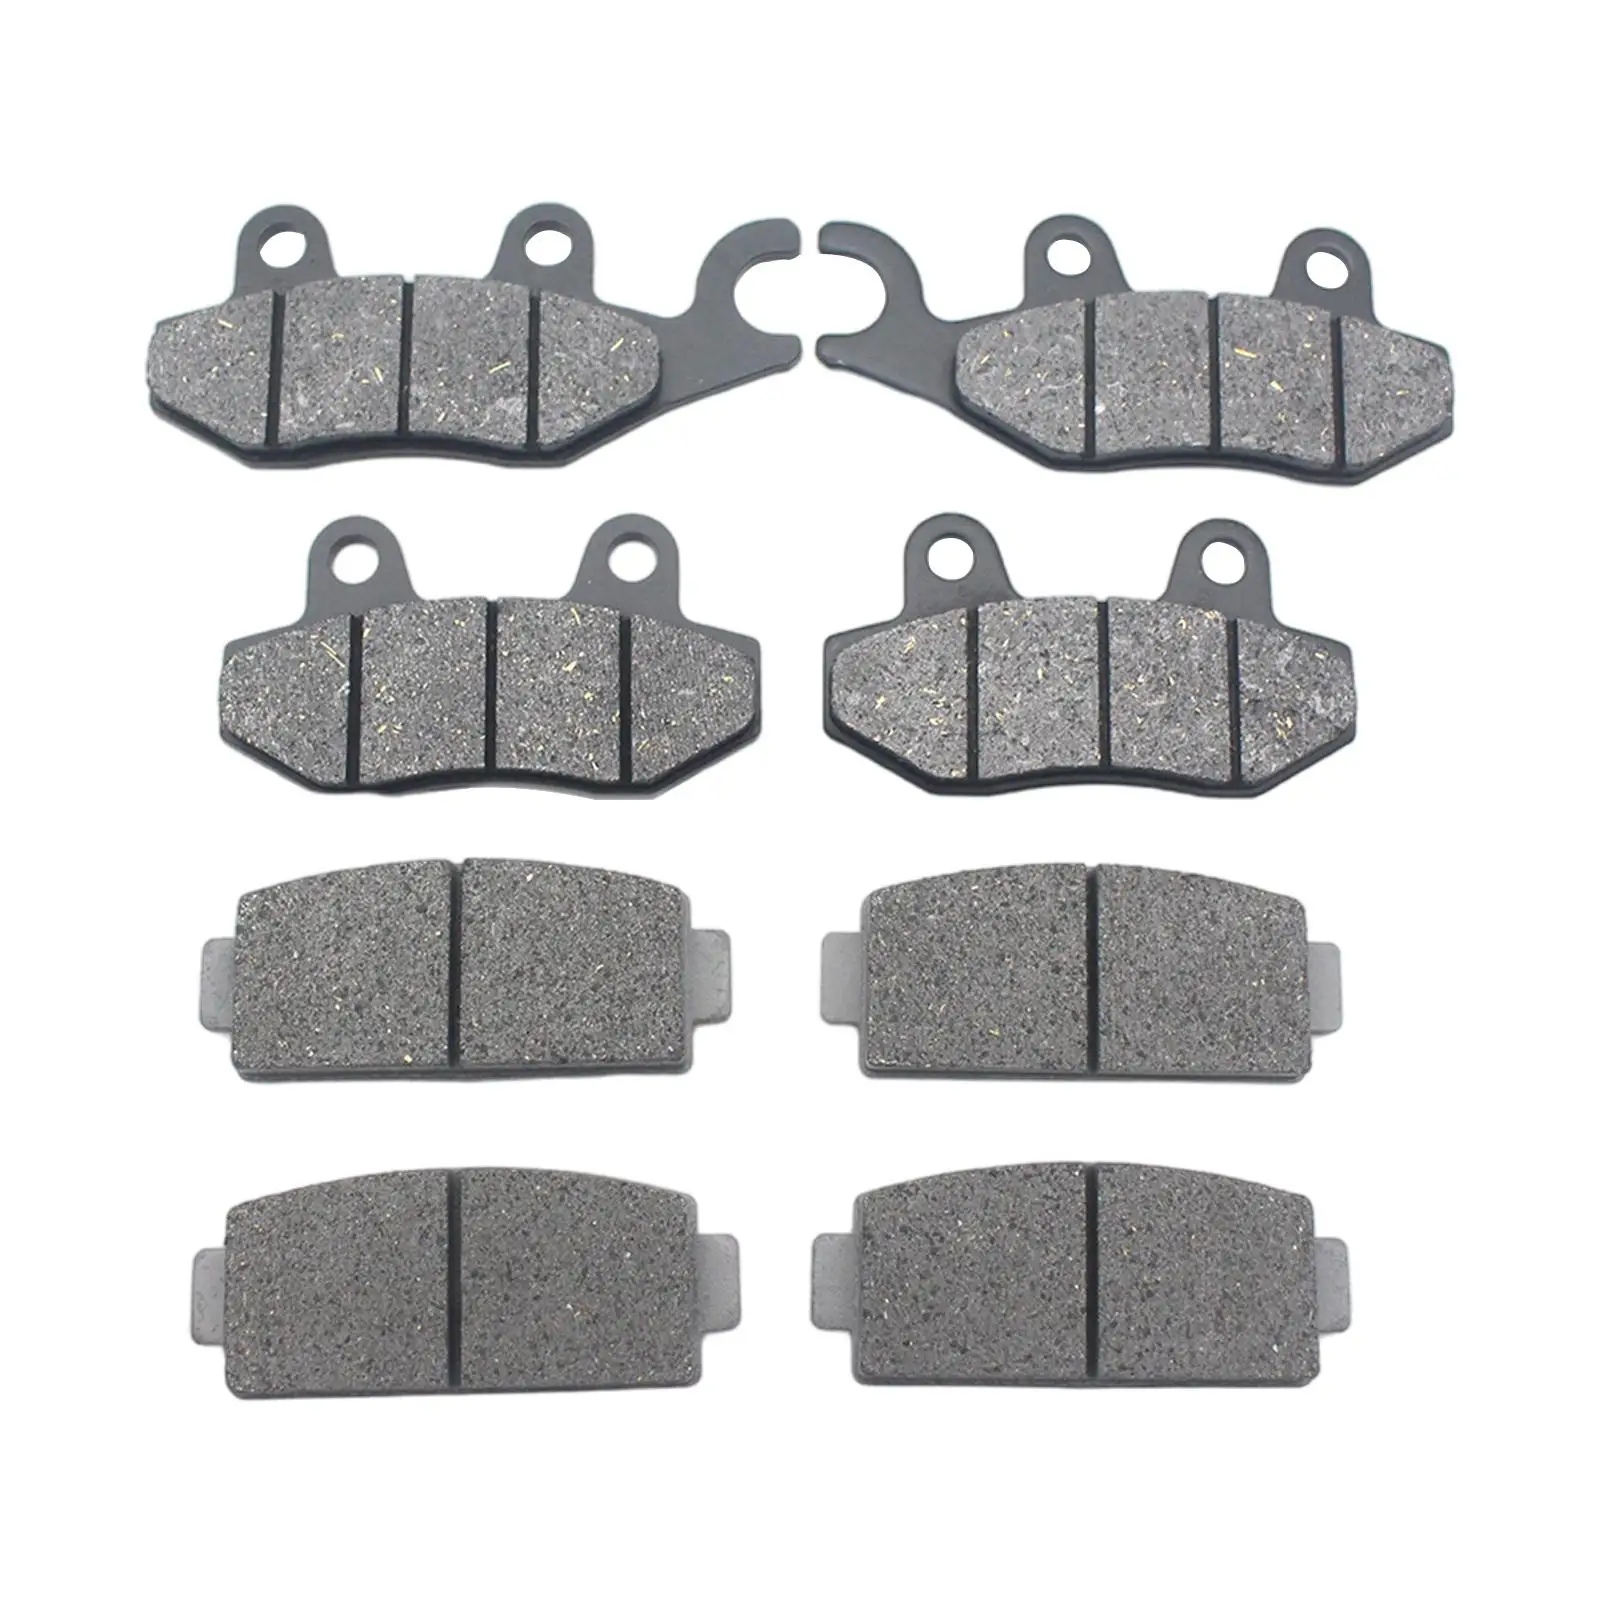 Front Rear  Brake Pads Replaces Part ,for 0  Z8 142017 Brake System,   550 2015, for CF 